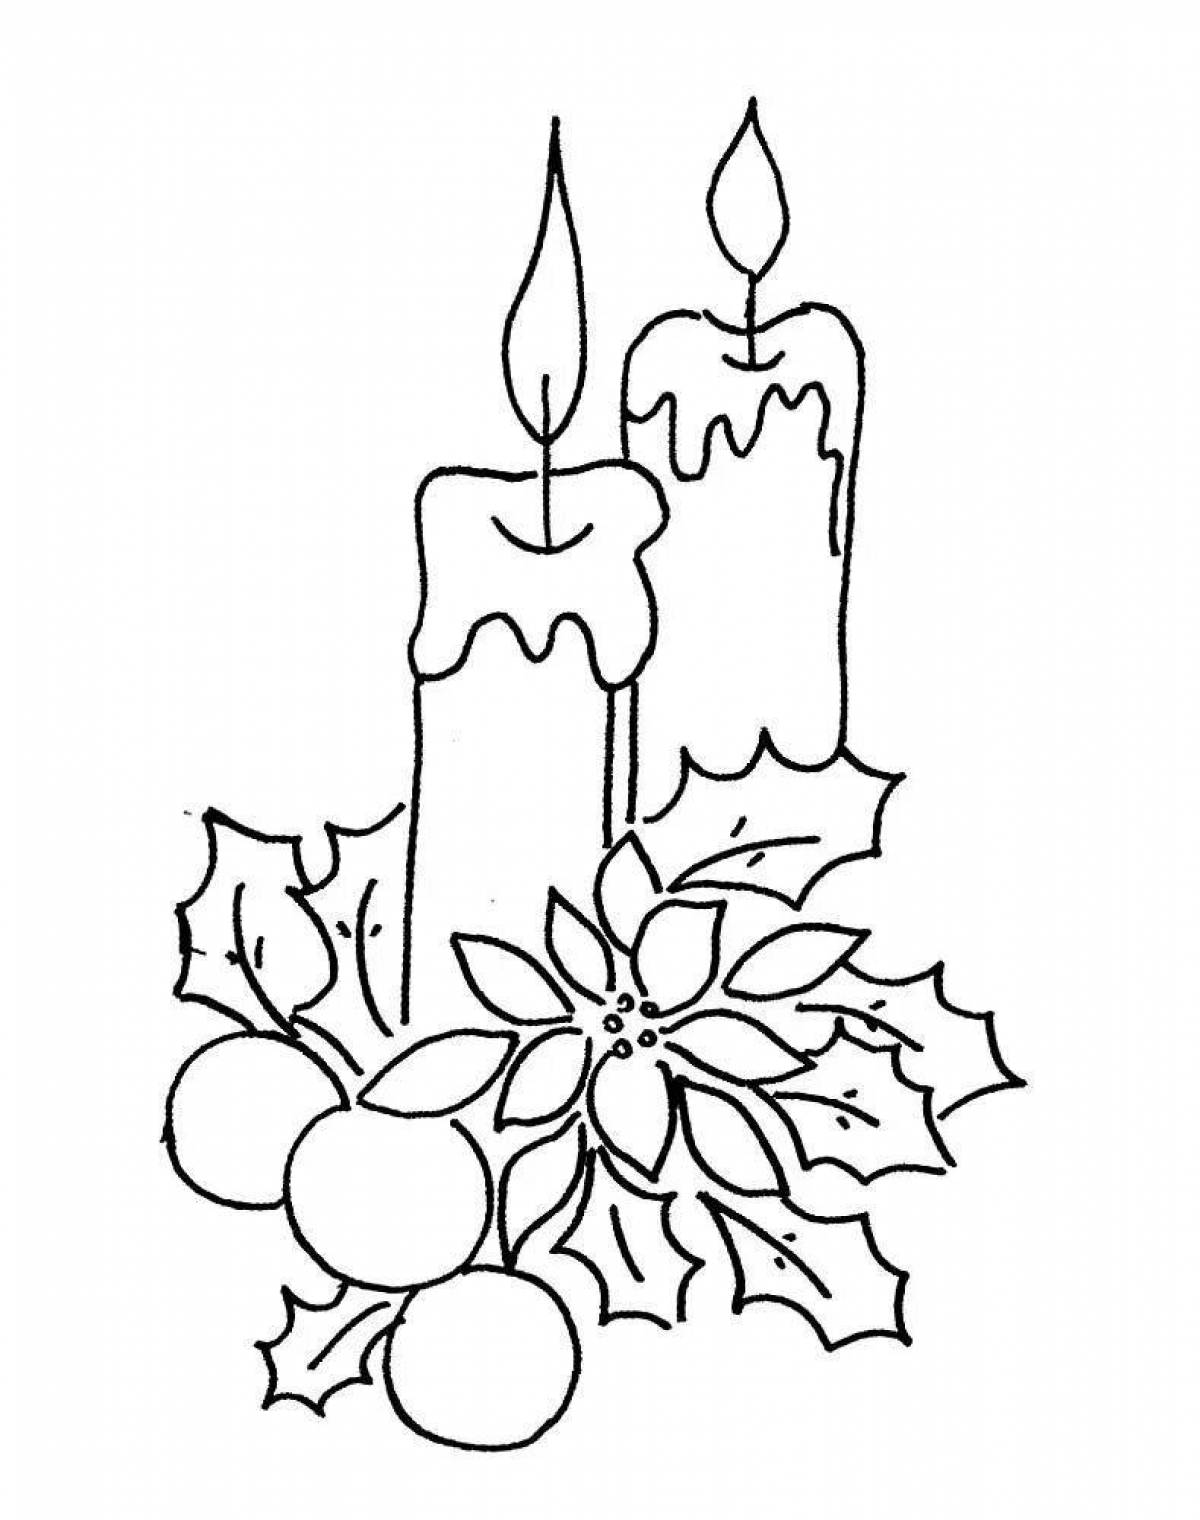 Exotic Christmas candle coloring page